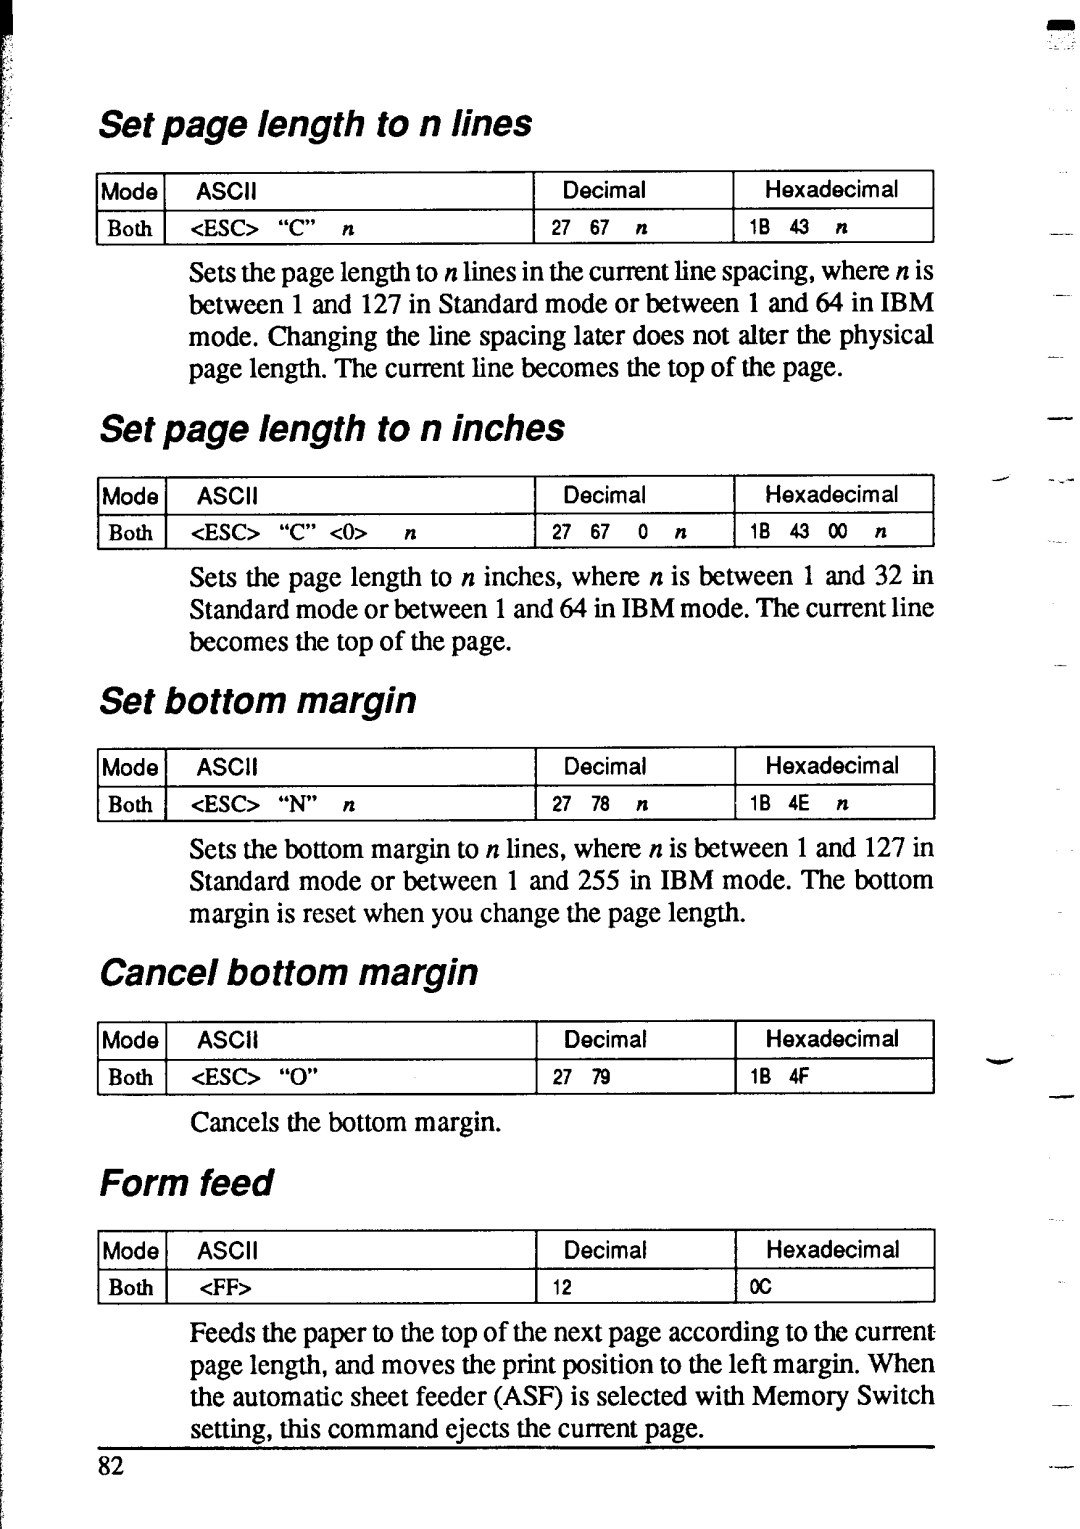 Star Micronics XR-1020 Set page length to n lines, Set page length to n inches, Set bottom margin, Cancel bottom margin 